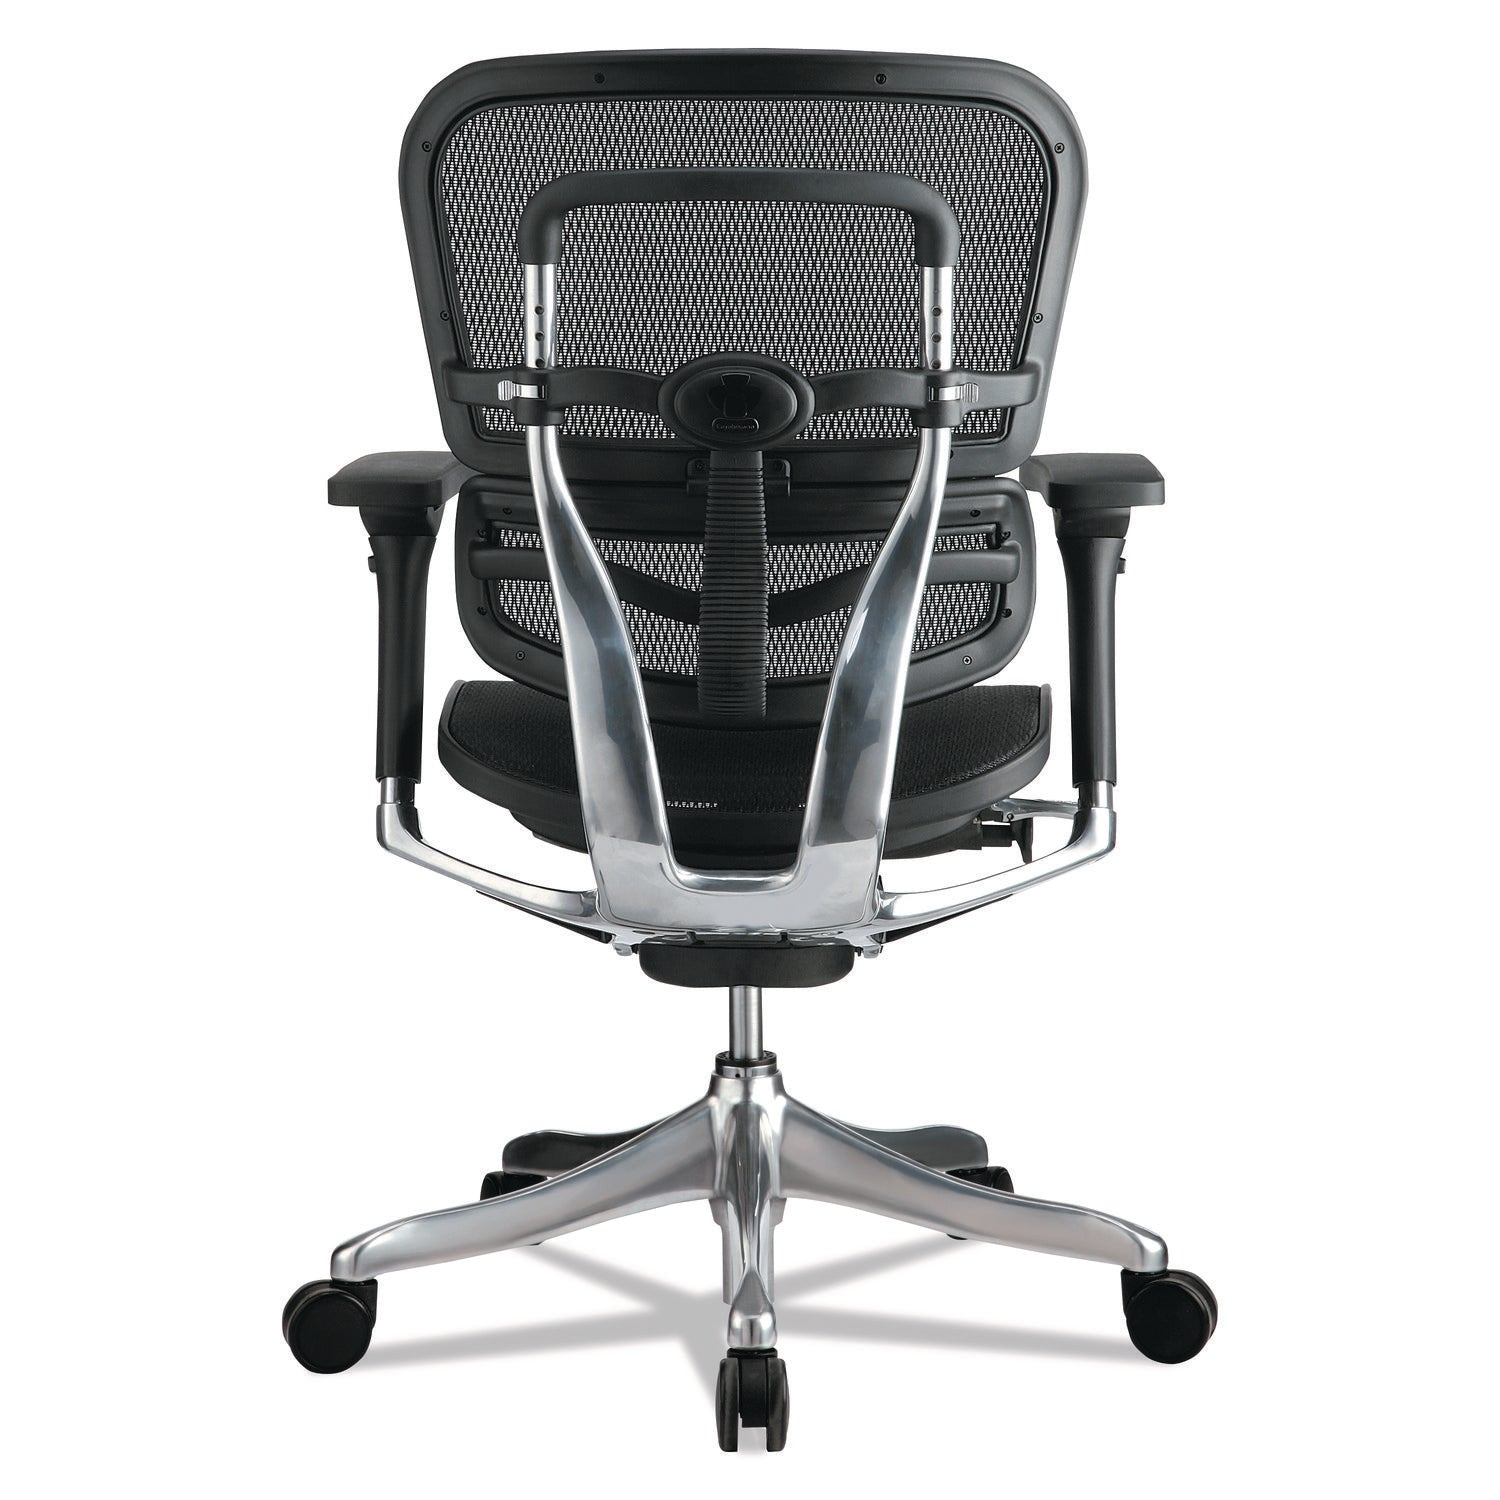 ergohuman-elite-mid-back-mesh-chair-supports-up-to-250-lb-1811-to-2165-seat-height-black_eutme5ergltn15 - 5